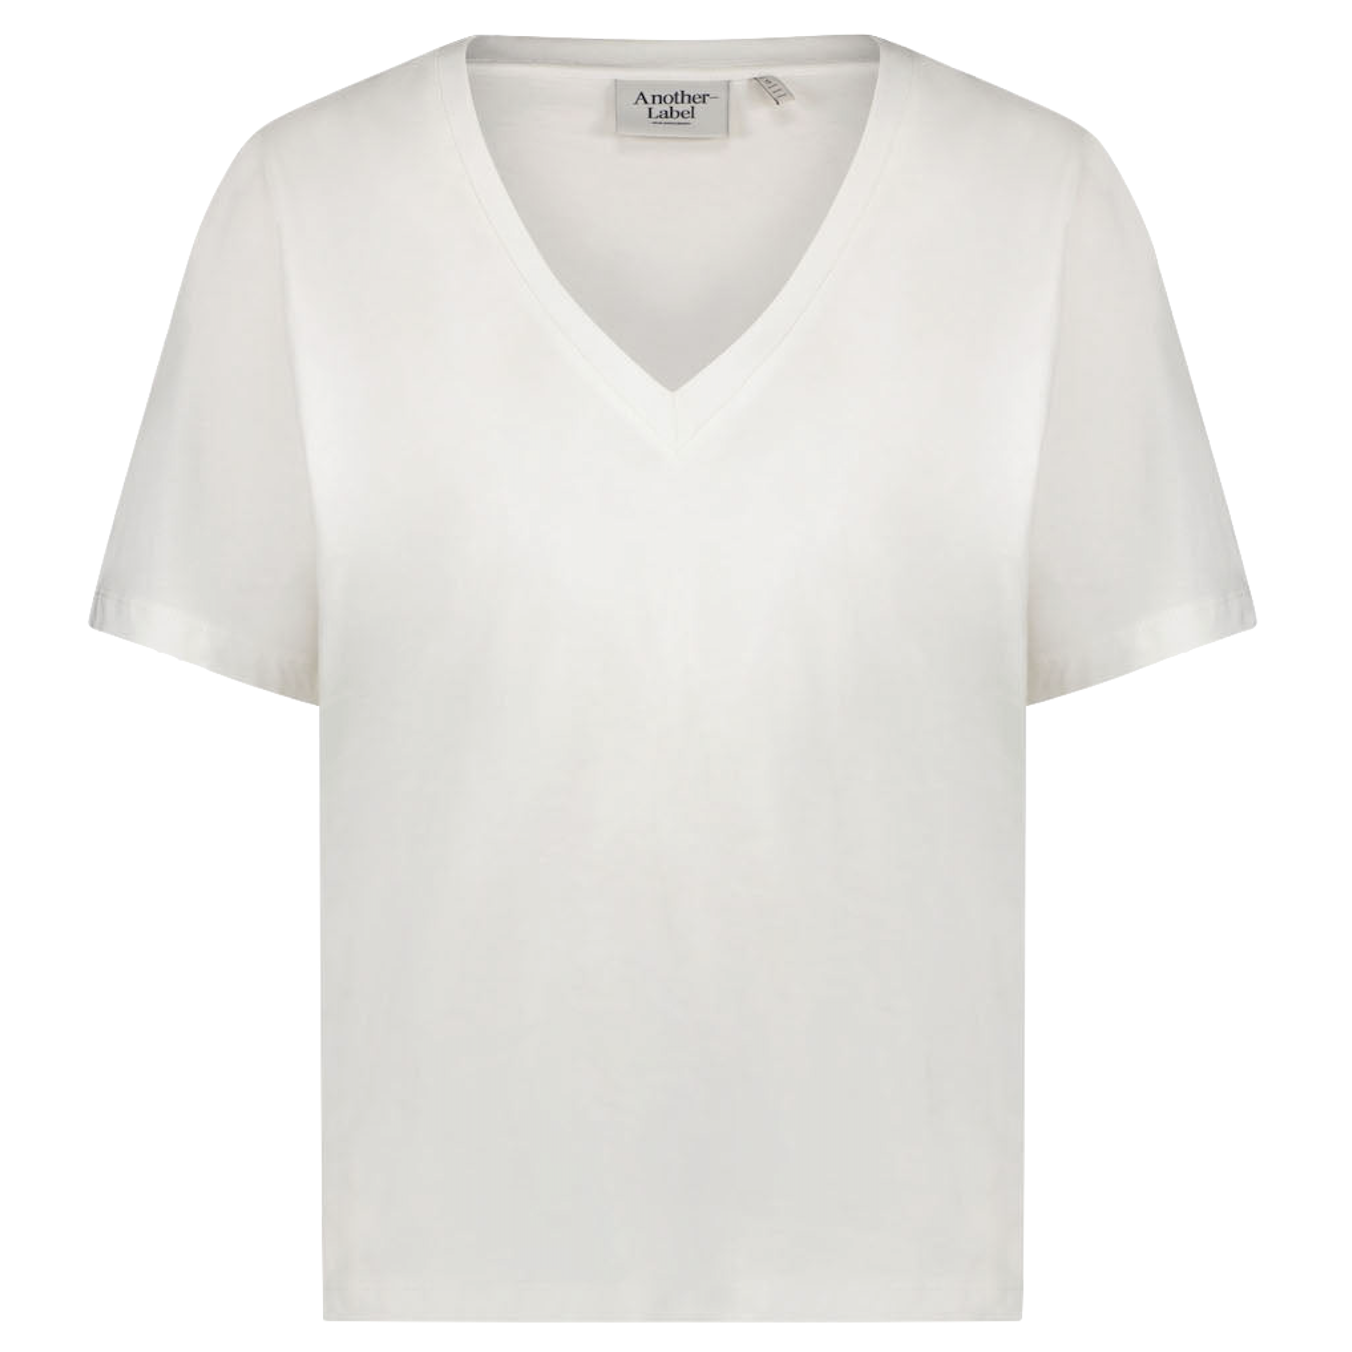 Another-Label Another-Label, Gaure V-Neck T-Shirt, off-white, L